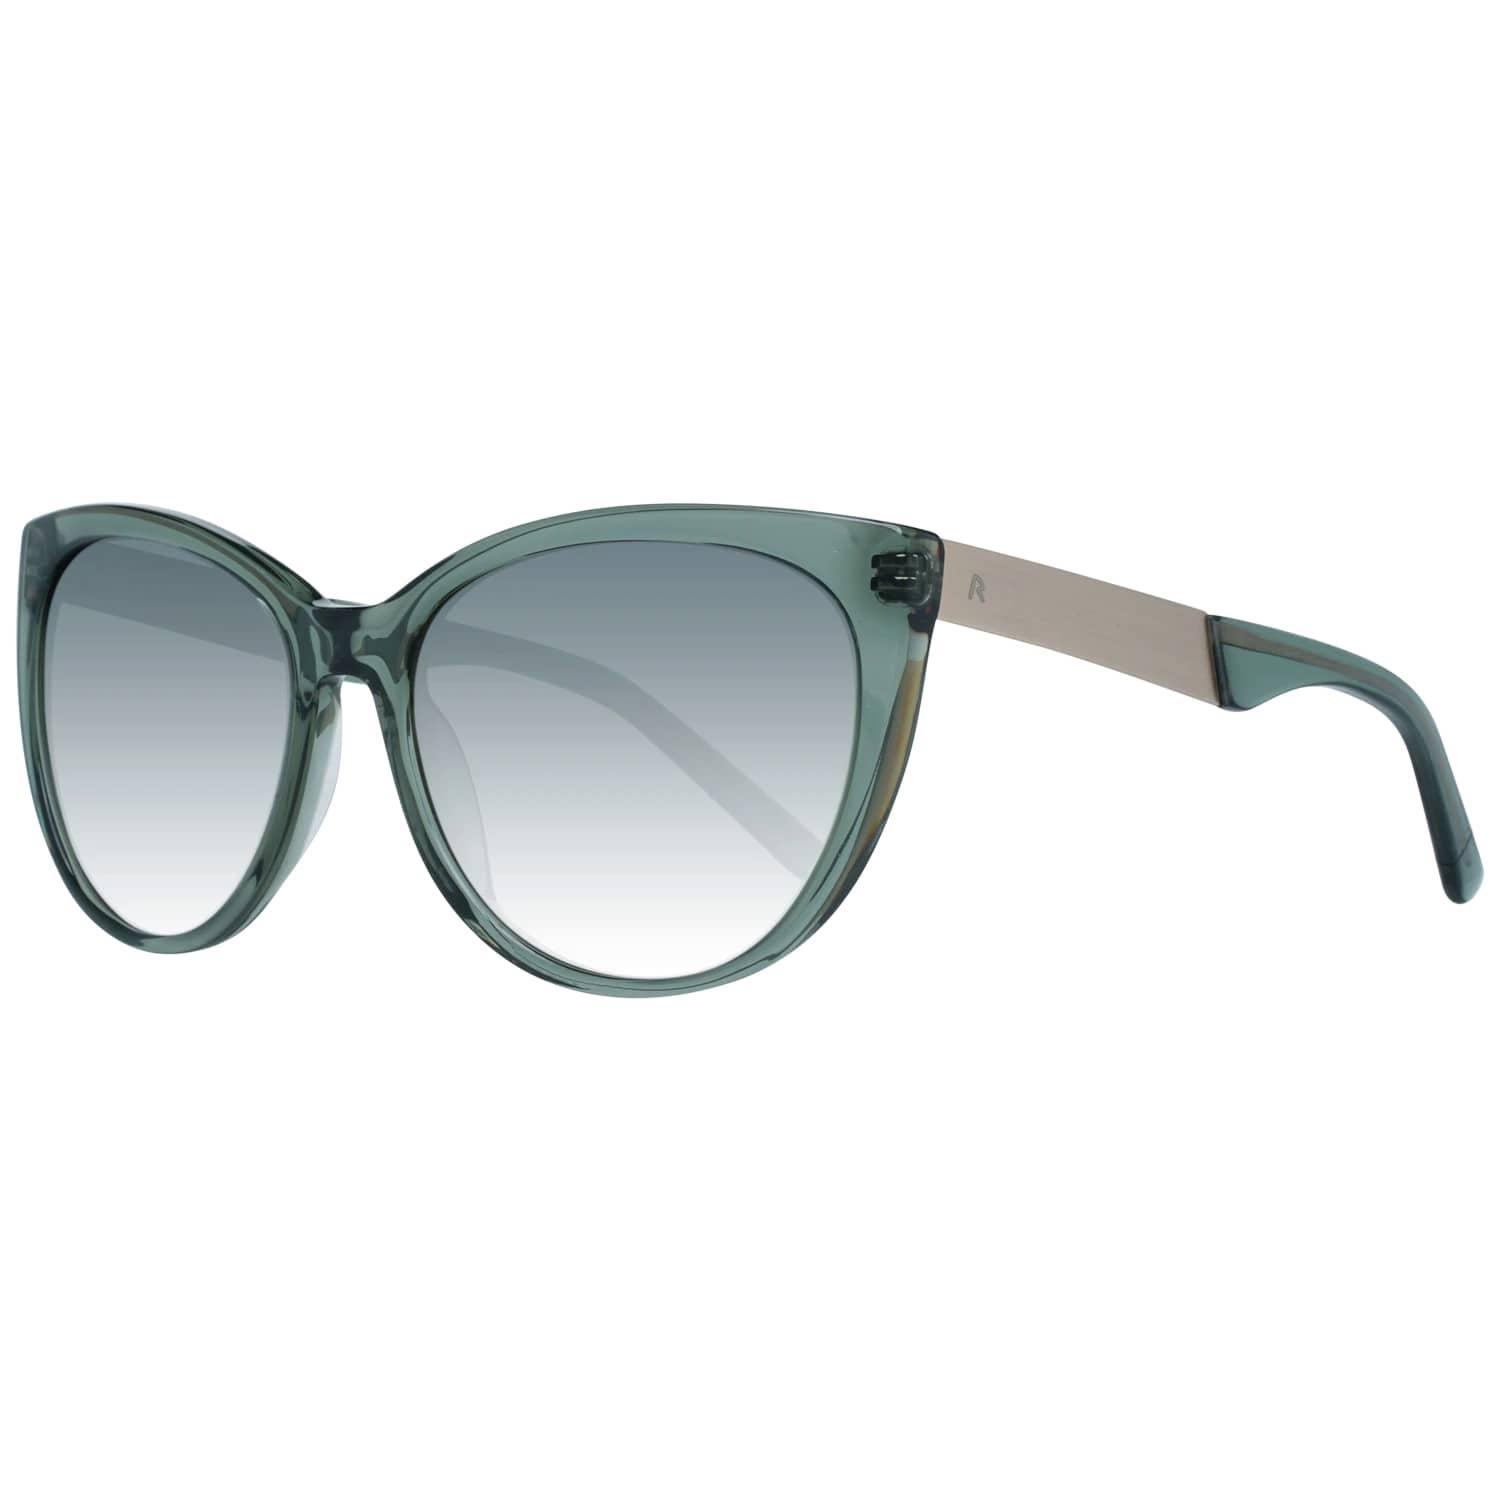 Details
MATERIAL: Metal
COLOR: Green
MODEL: R3300-D-5517-135-V223-E42
GENDER: Women
COUNTRY OF MANUFACTURE: China
TYPE: Sunglasses
ORIGINAL CASE?: Yes
STYLE: Oval
OCCASION: Casual
FEATURES: Lightweight
LENS COLOR: Green
LENS TECHNOLOGY: